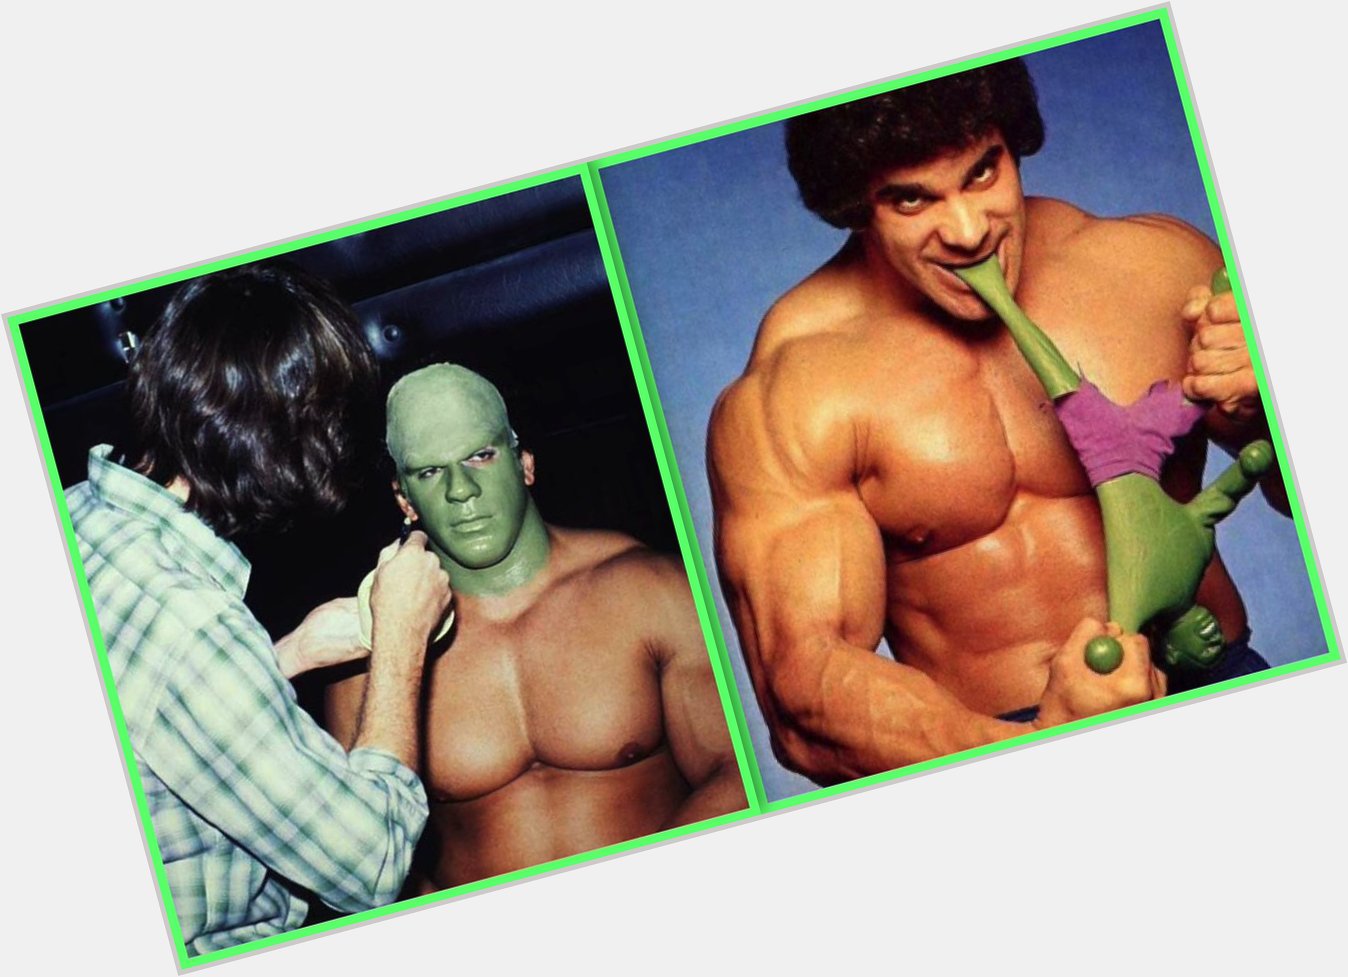 Wishing Lou Ferrigno an Incredibly Happy 66th Birthday! Everyone has his own little Hulk inside him. 